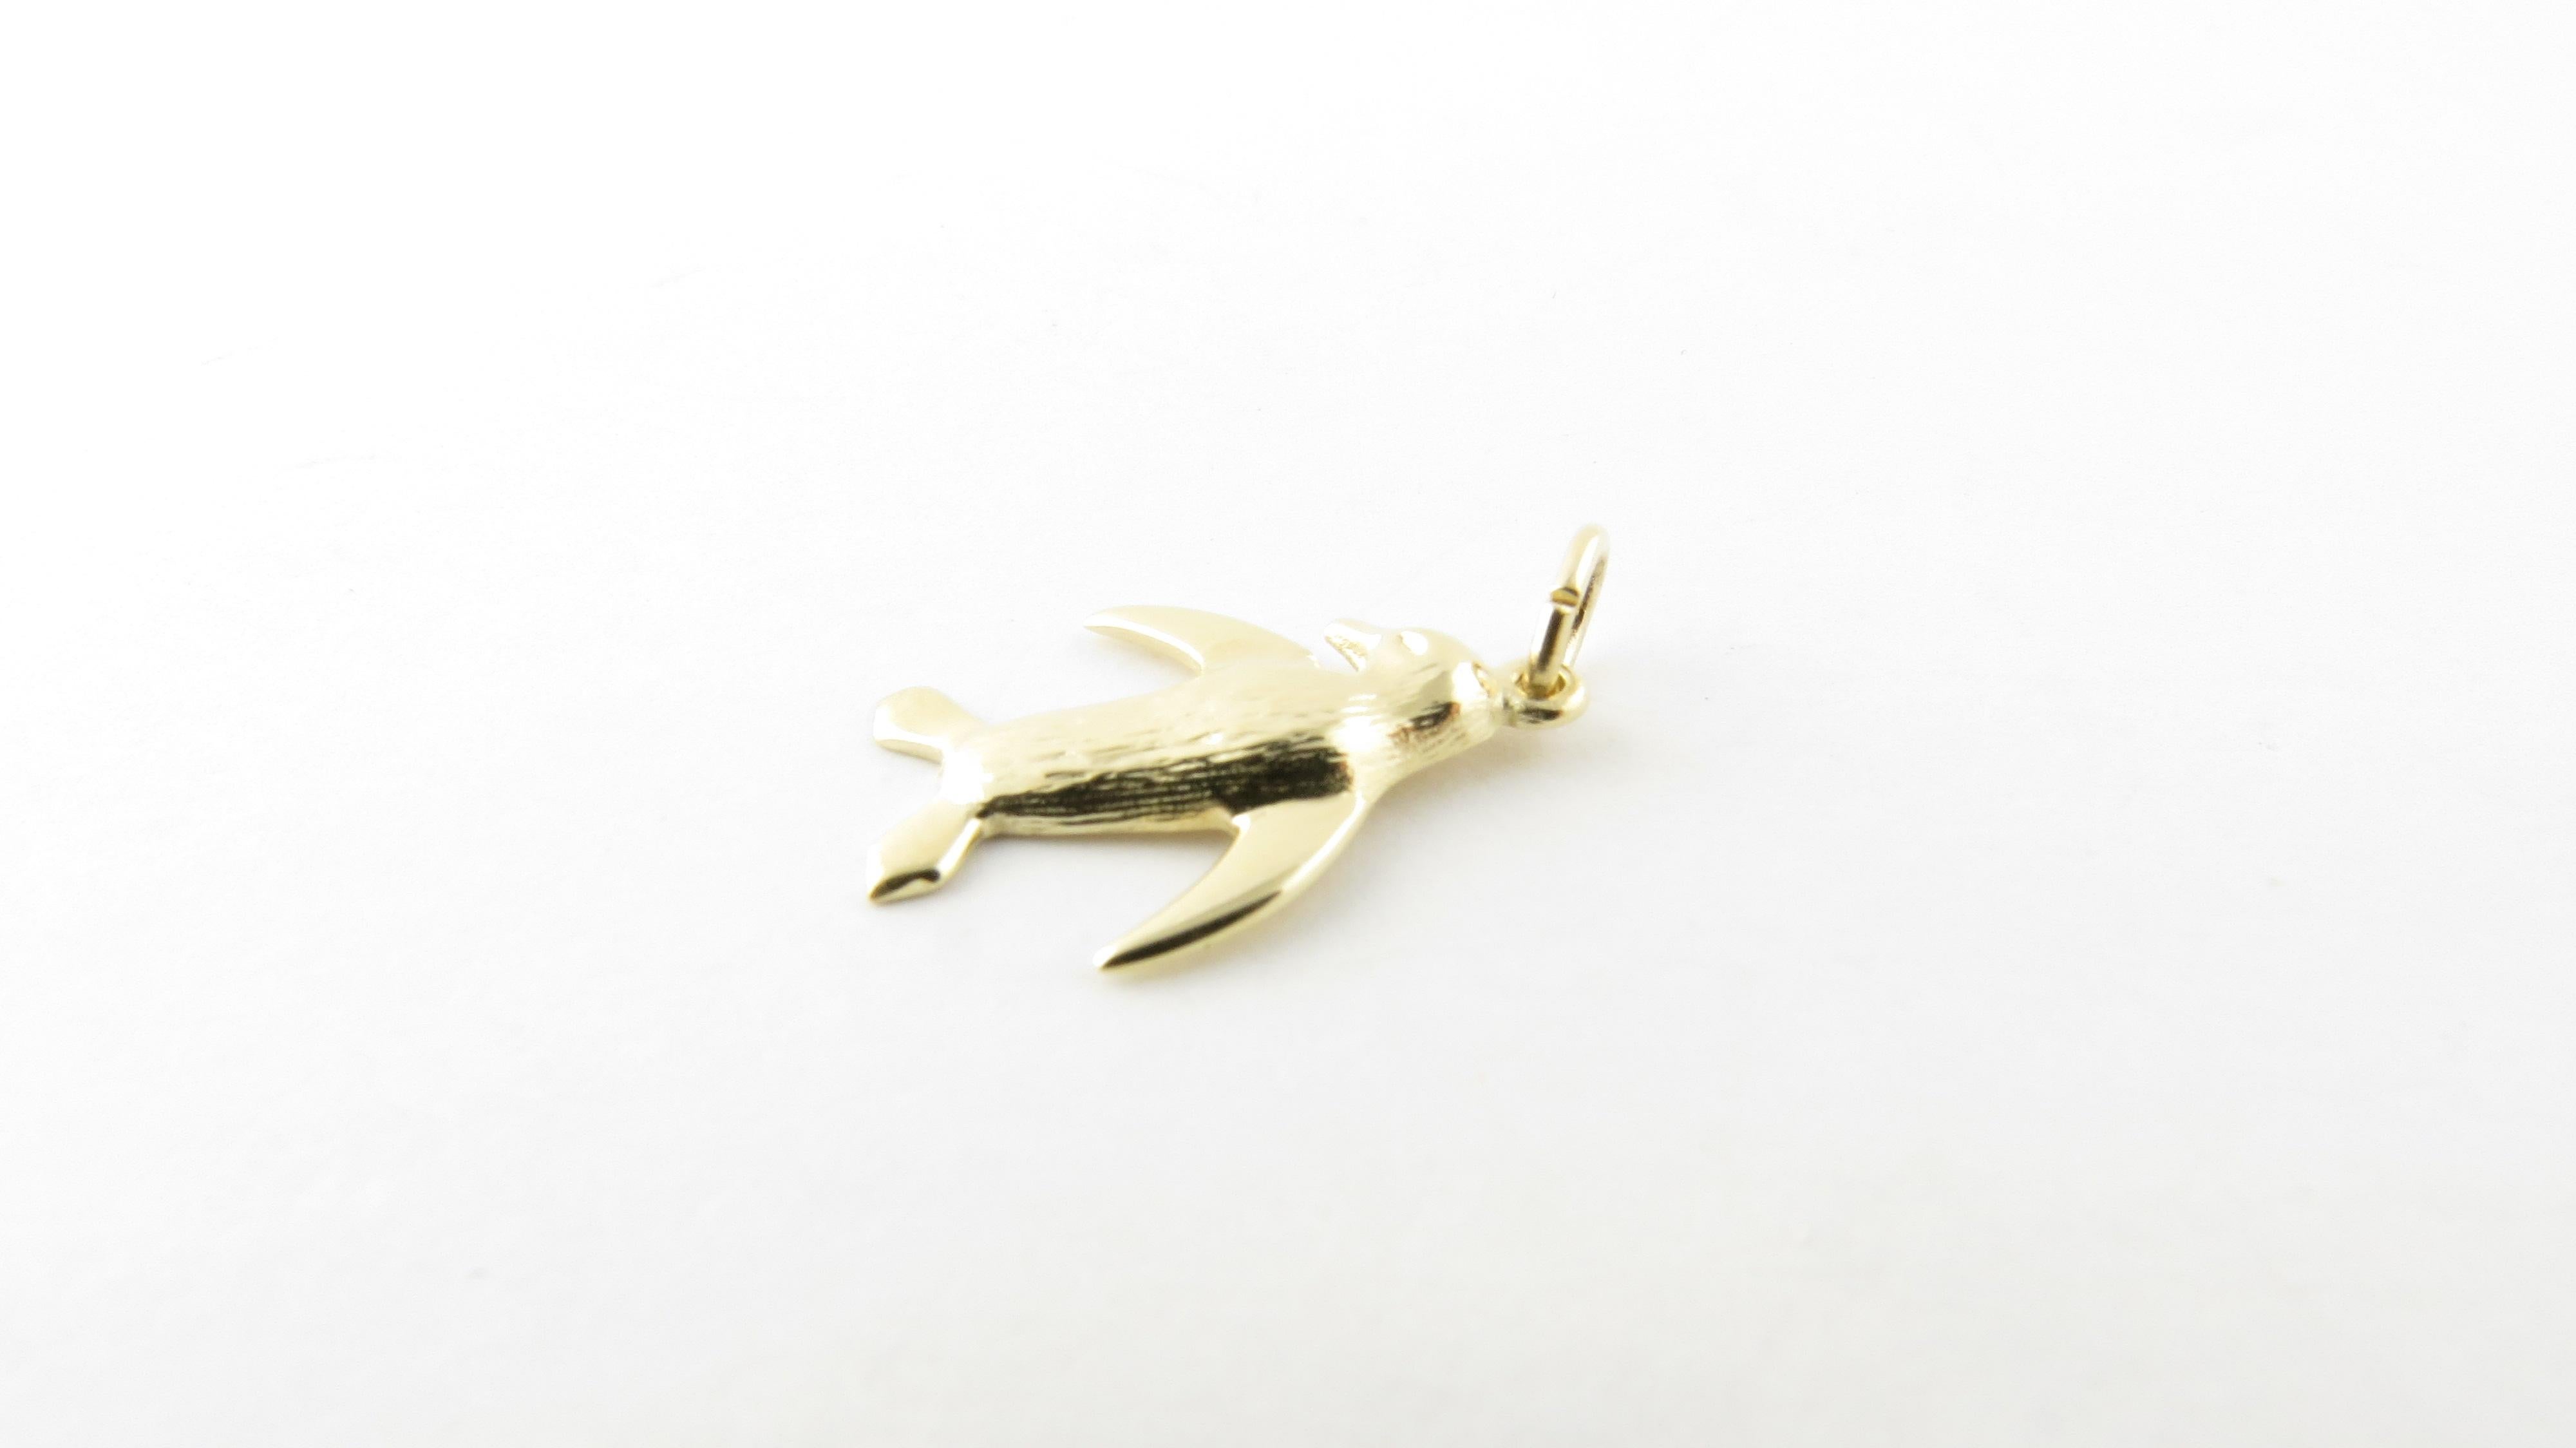 14 Karat Yellow Gold Penguin Charm-

Take a trip to the North Pole!

This lovely charm features a miniature penguin meticulously detailed in 14K yellow gold.

Size:    20 mm x 14 mm (actual charm)

Weight:  1.0 dwt. /  1.7 gr. 

Stamped: